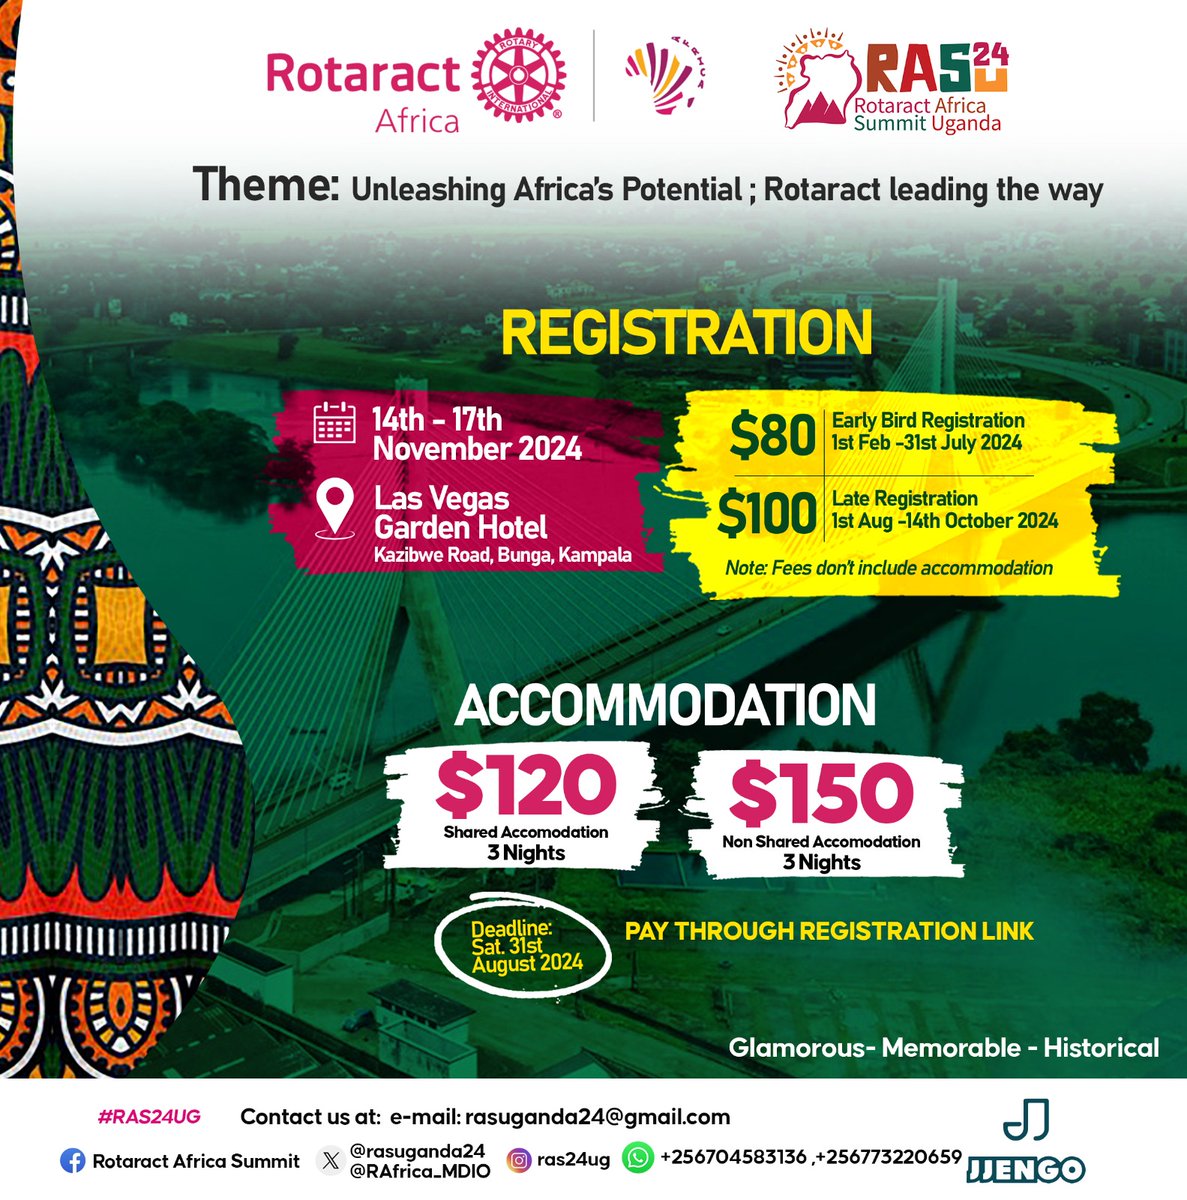 👉Connect with a diversity of agile professionals from Africa continent and Beyond 
👉Dance to the mellifluous symphony of African rhymes
👉Execution of an impactful community project 
 👉Explore mind blowing adventures around the pearl of Africa

Register Now

#RAS24UG
#LILIES𓆸